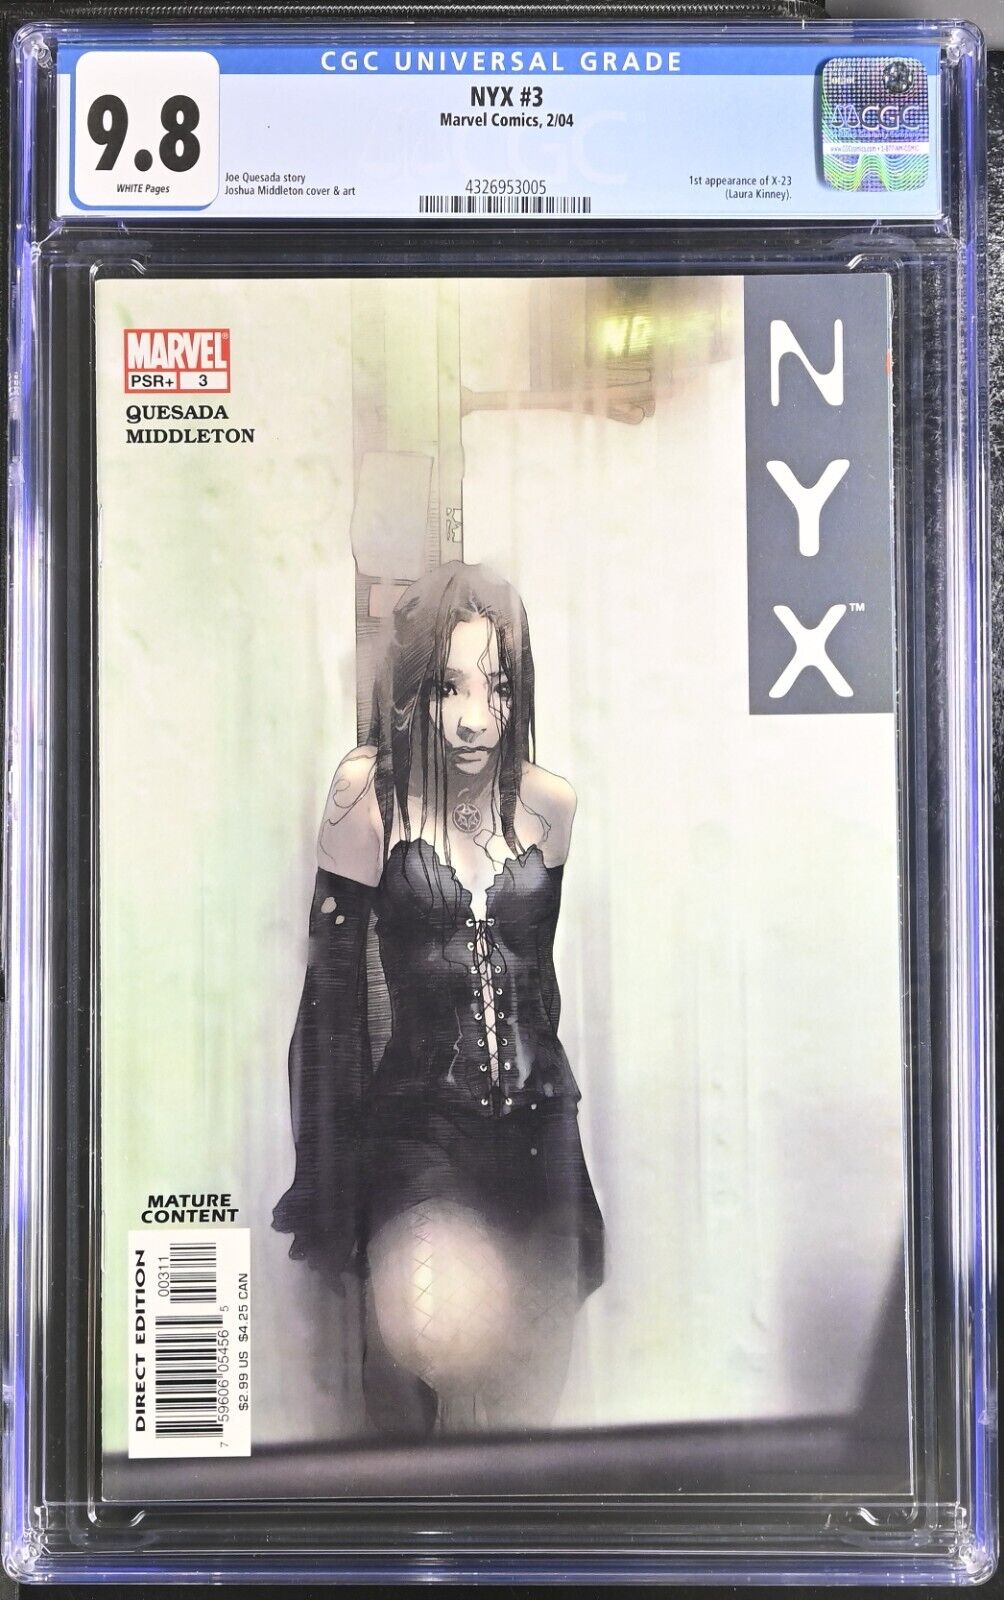 NYX 3 CGC 98 Stunning Book 2004 1st Appearance of X23 Laura Kinney